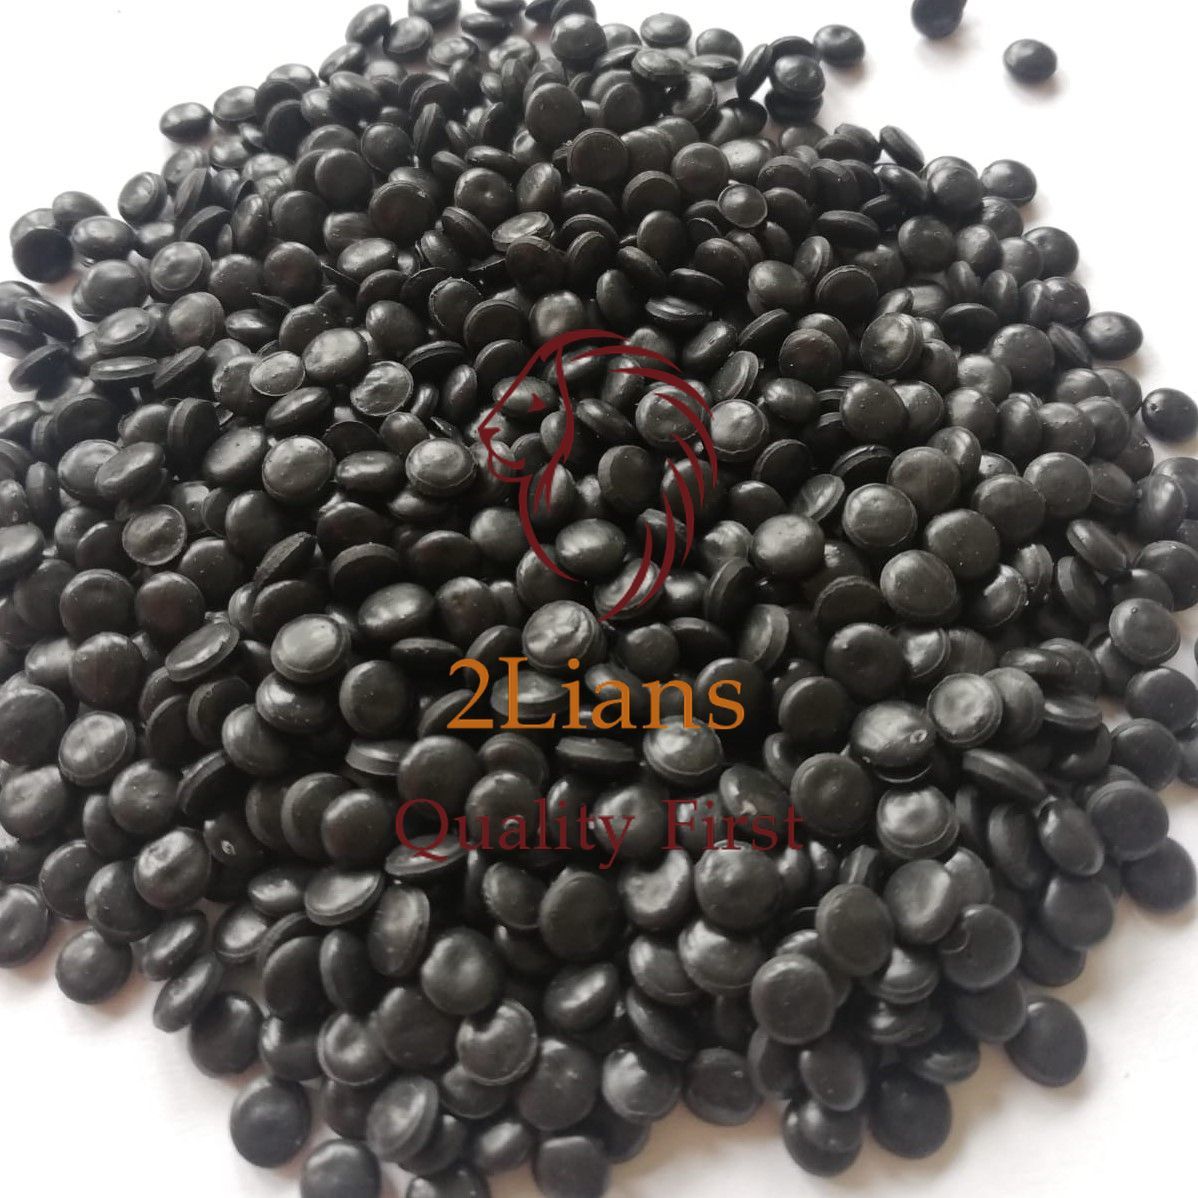 LDPE Pellets For Recycling